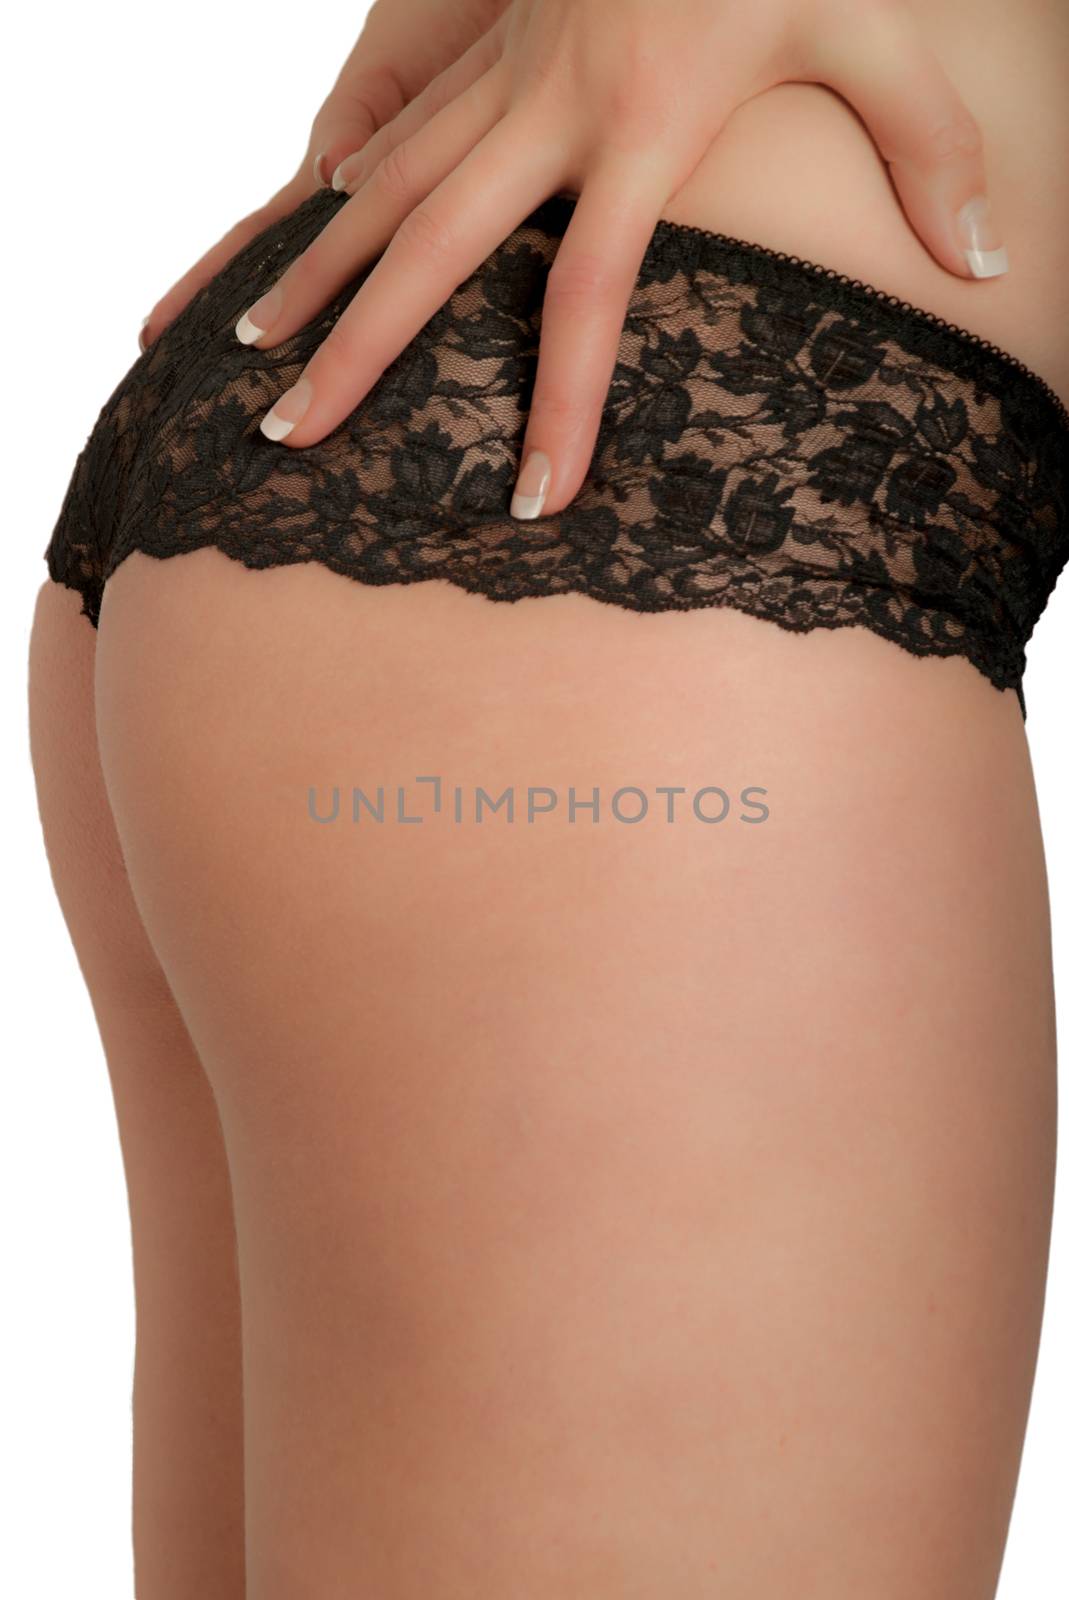 Buttocks with hands on french knickers side views